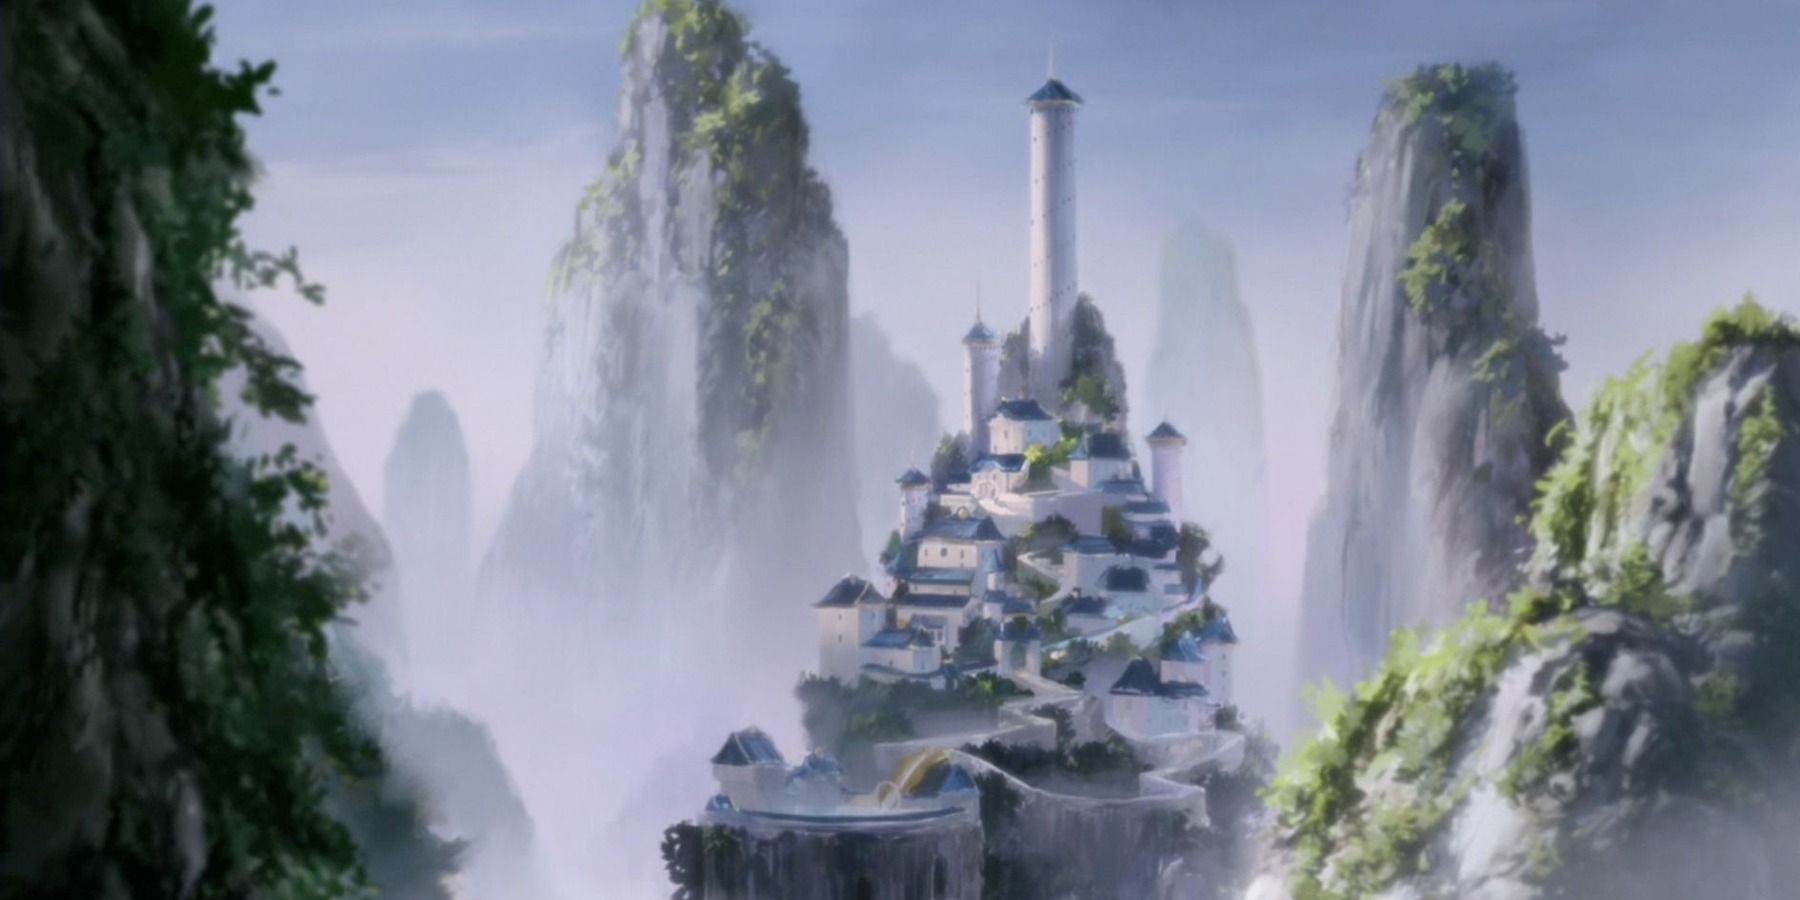 The Air Temples in Legend of Korra.